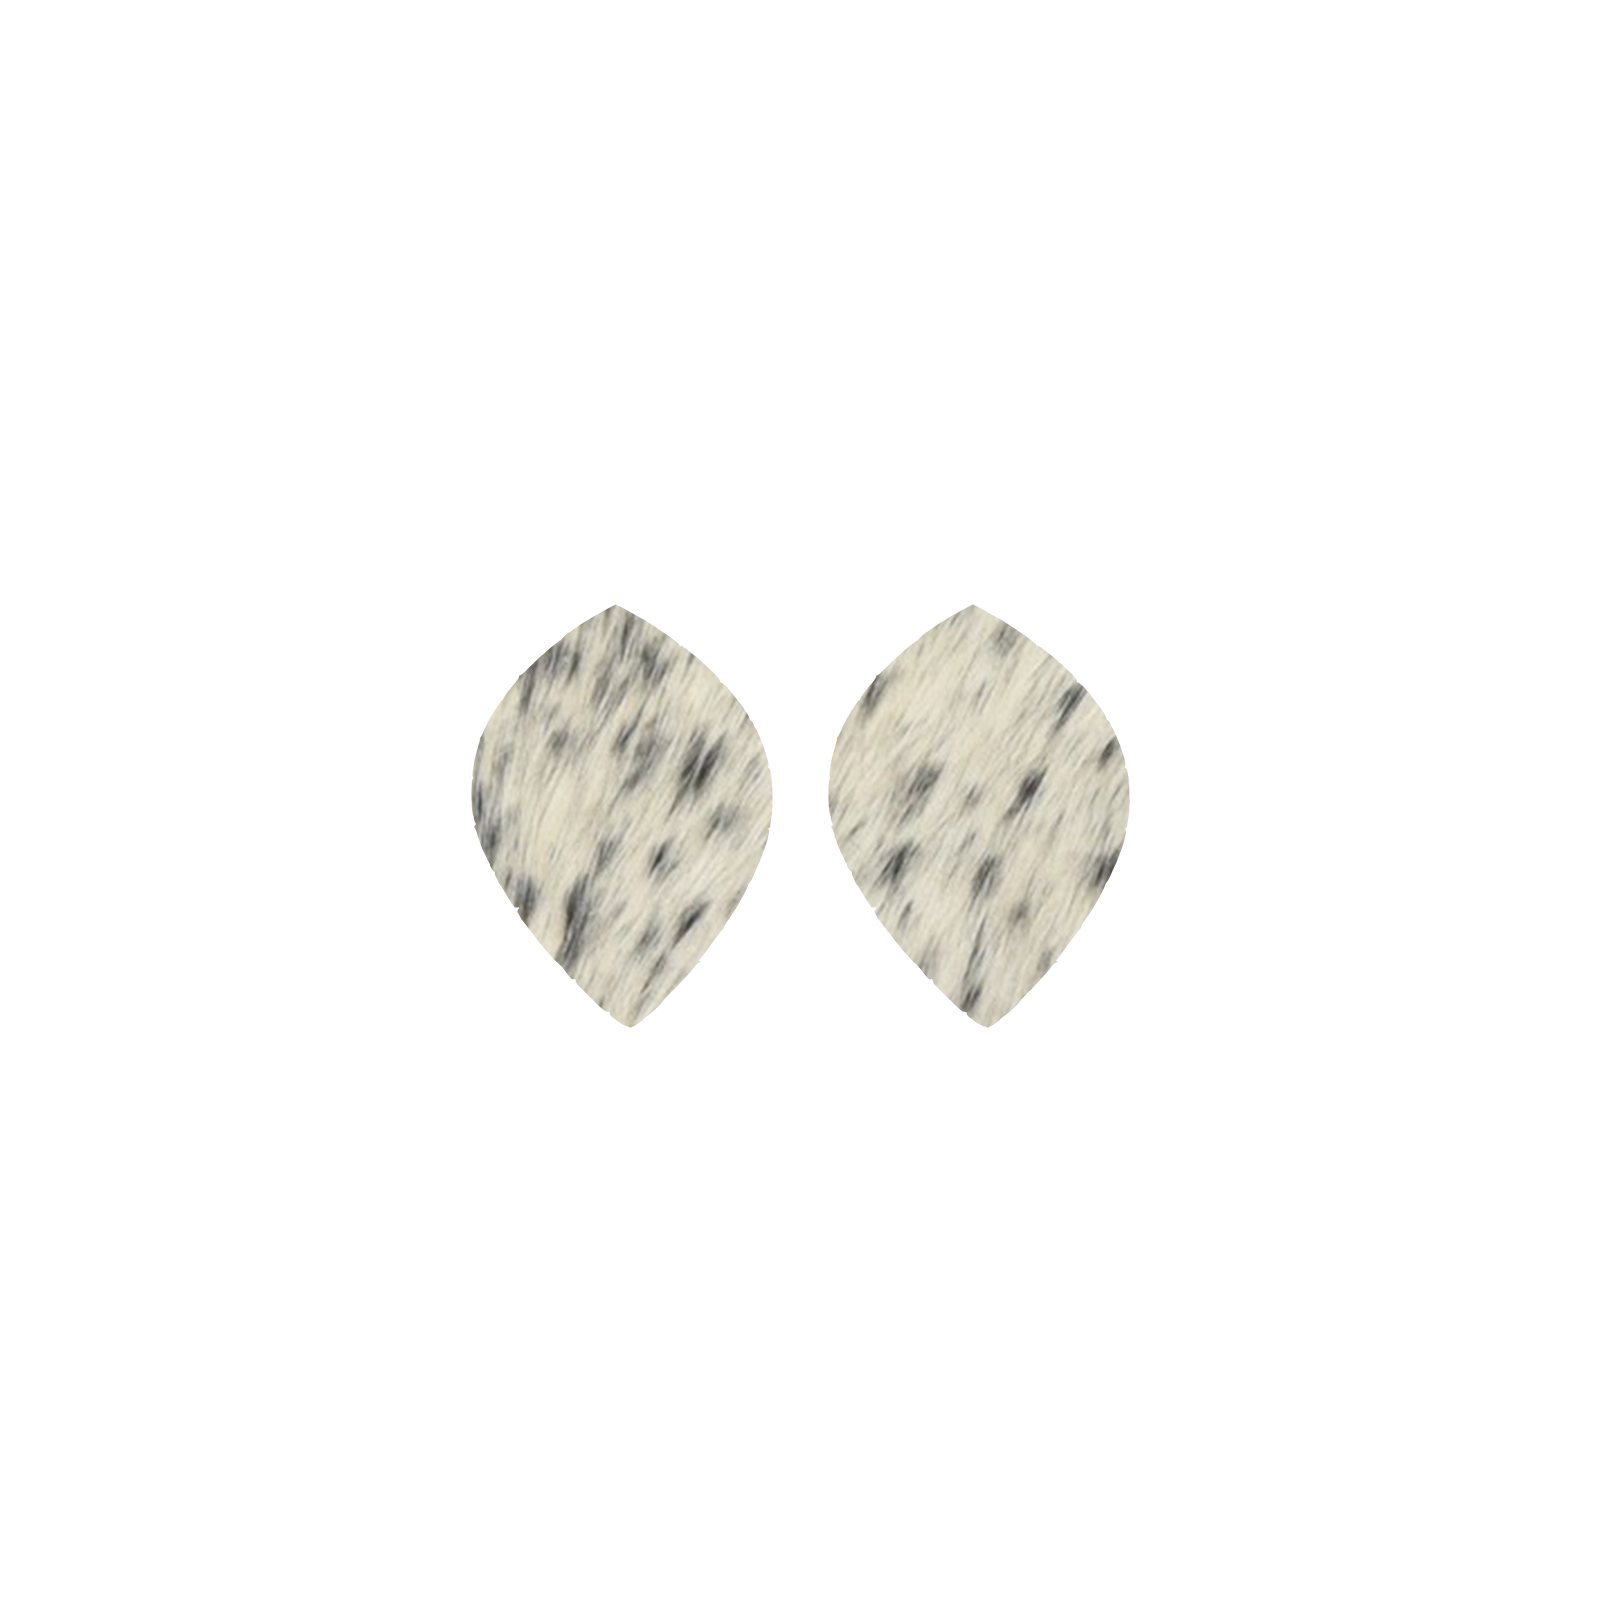 Spotted Light Black and Off White Hair On Die Cut Earrings, Small Leaf | The Leather Guy